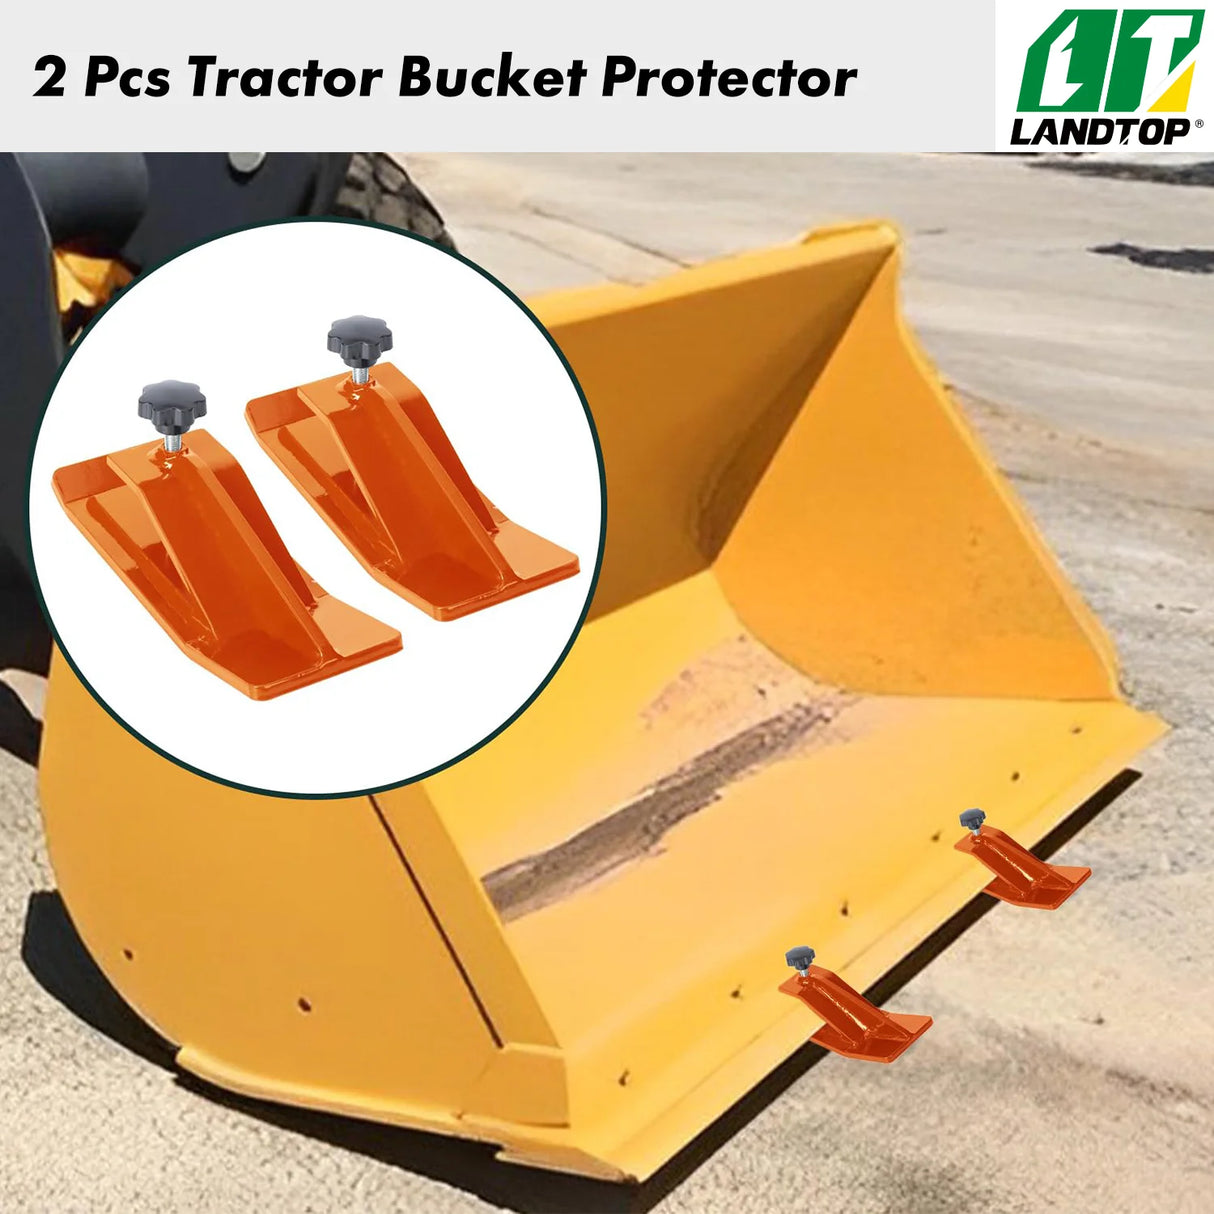 Tractor Bucket Protector, 2pcs Ski Edge Protector, Turf Tamer Skid Protector, Heavy Duty Steel Bucket Edge Anti-Skid Device, Bucket Attachment for Snow Leaves Removal Spreading Gravel, Orange